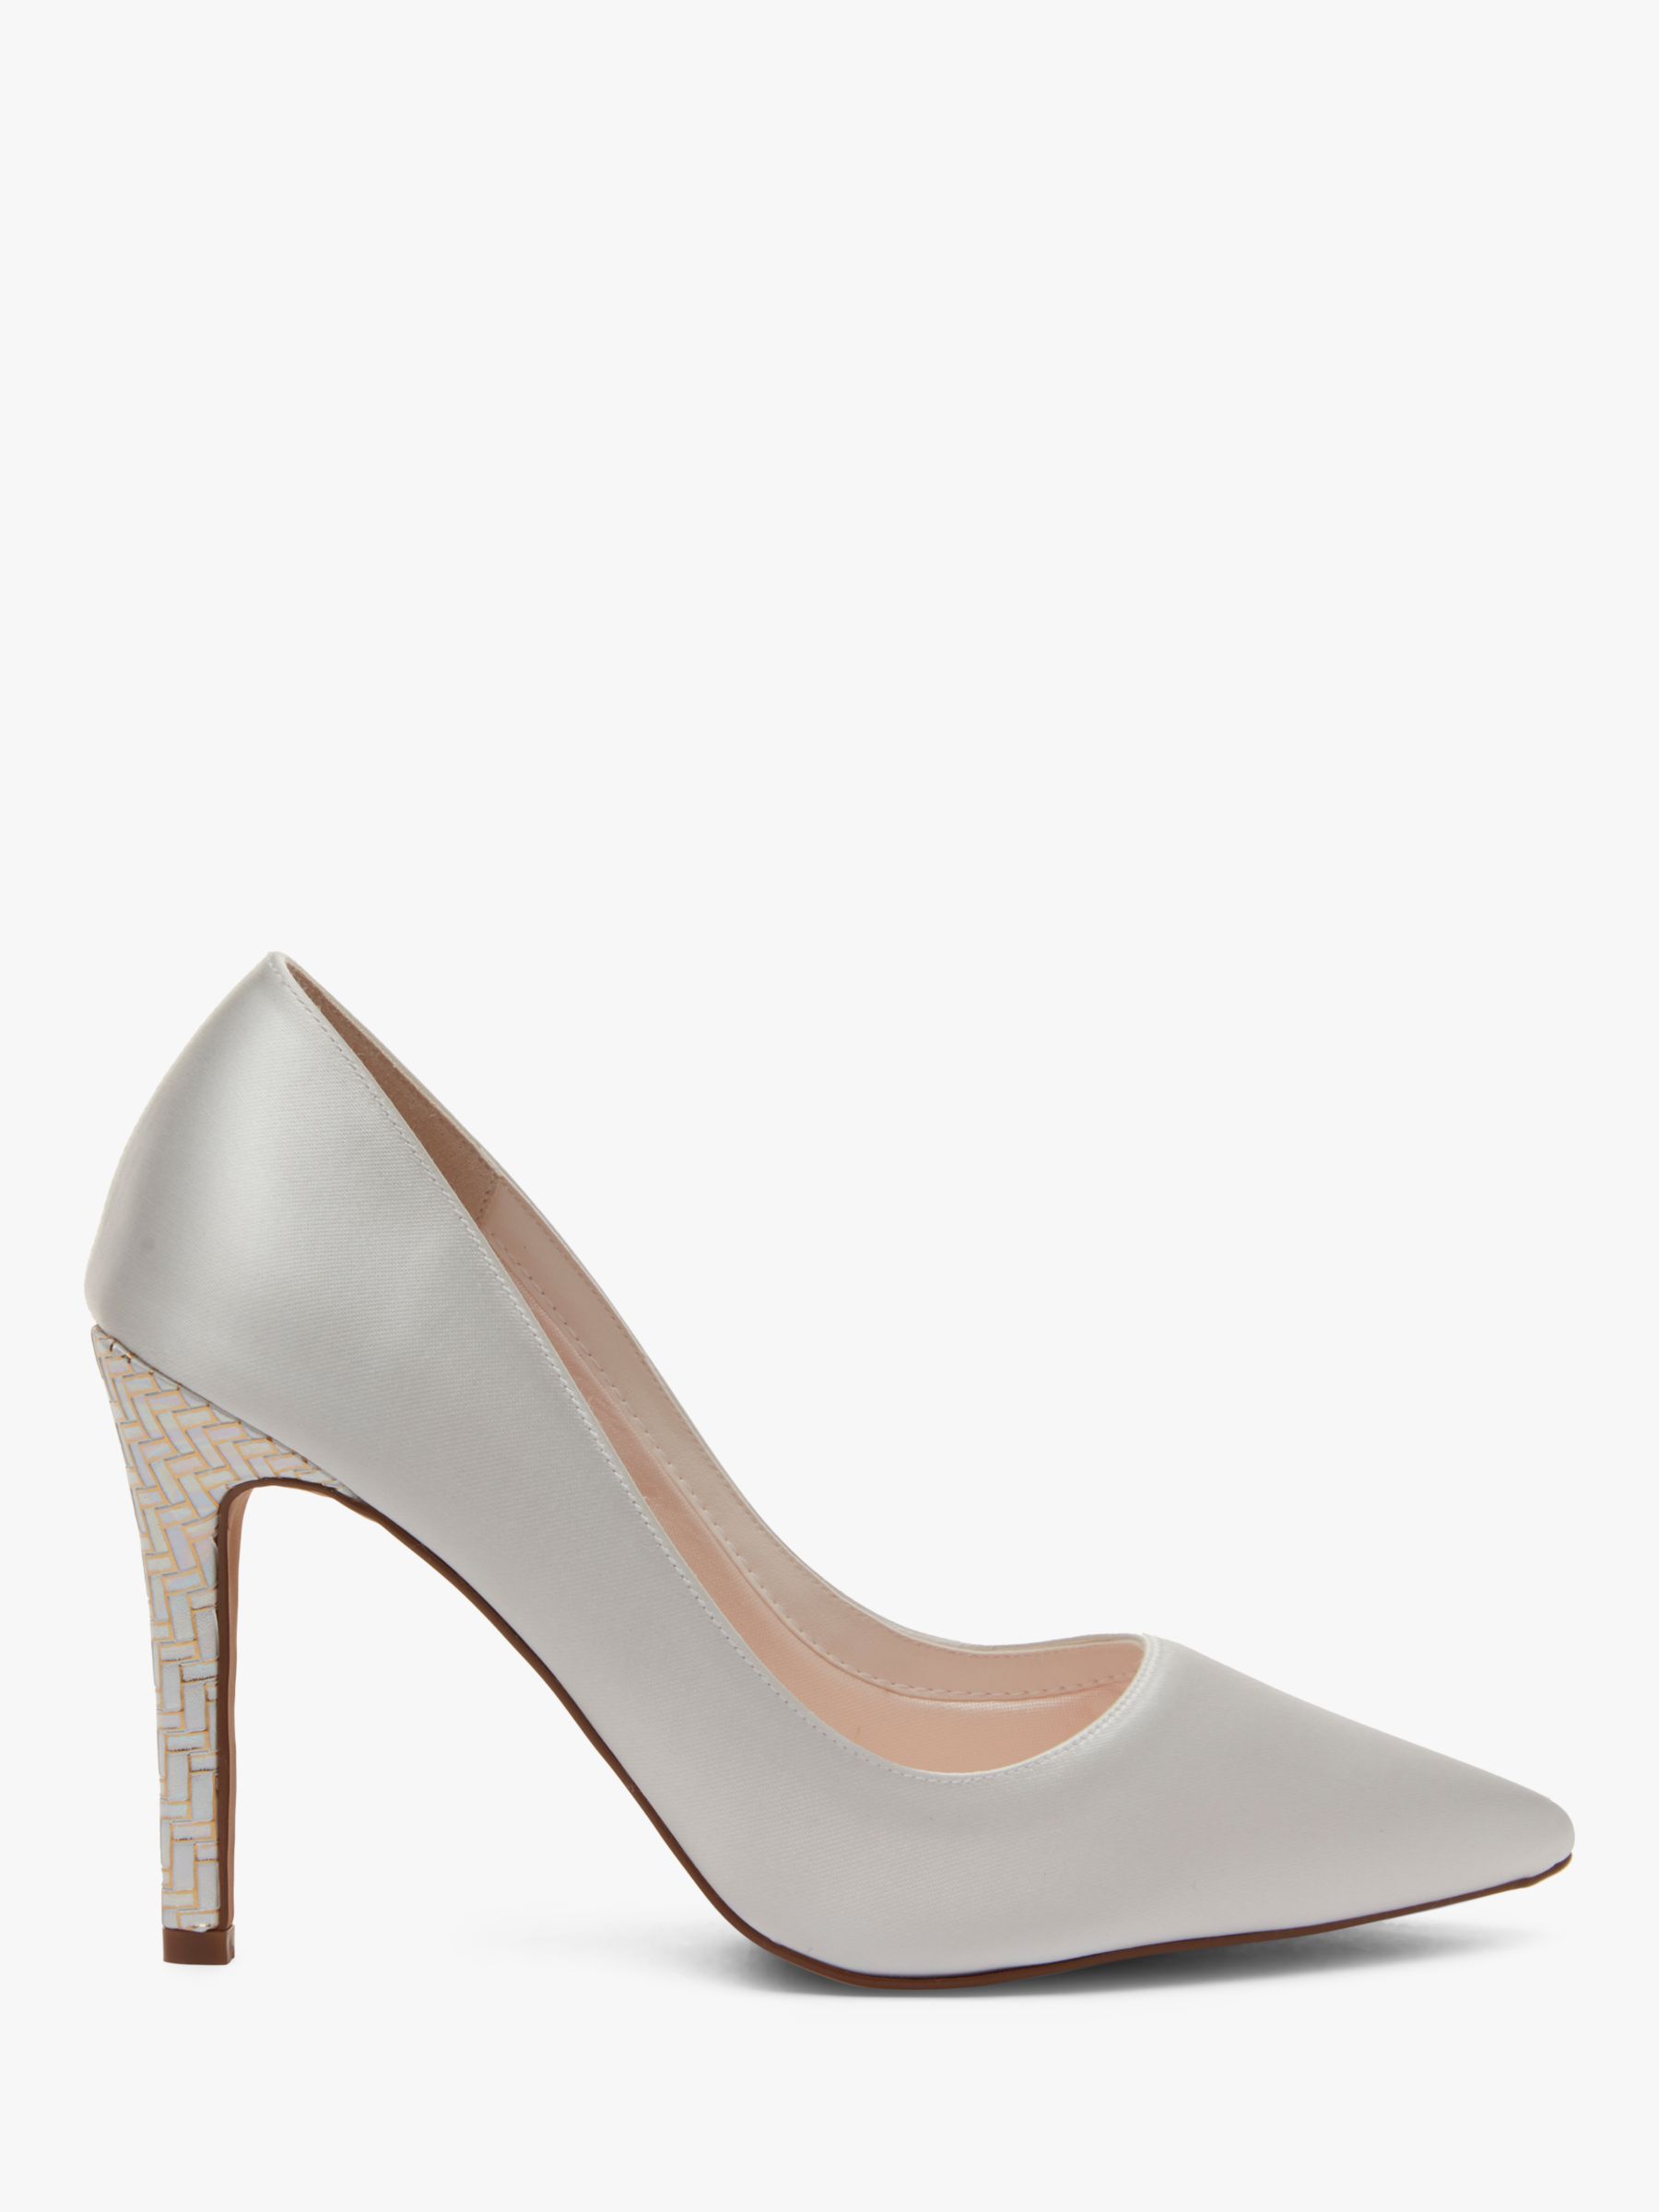 Rainbow Club Rochelle Satin Pointed Court Shoes, Ivory